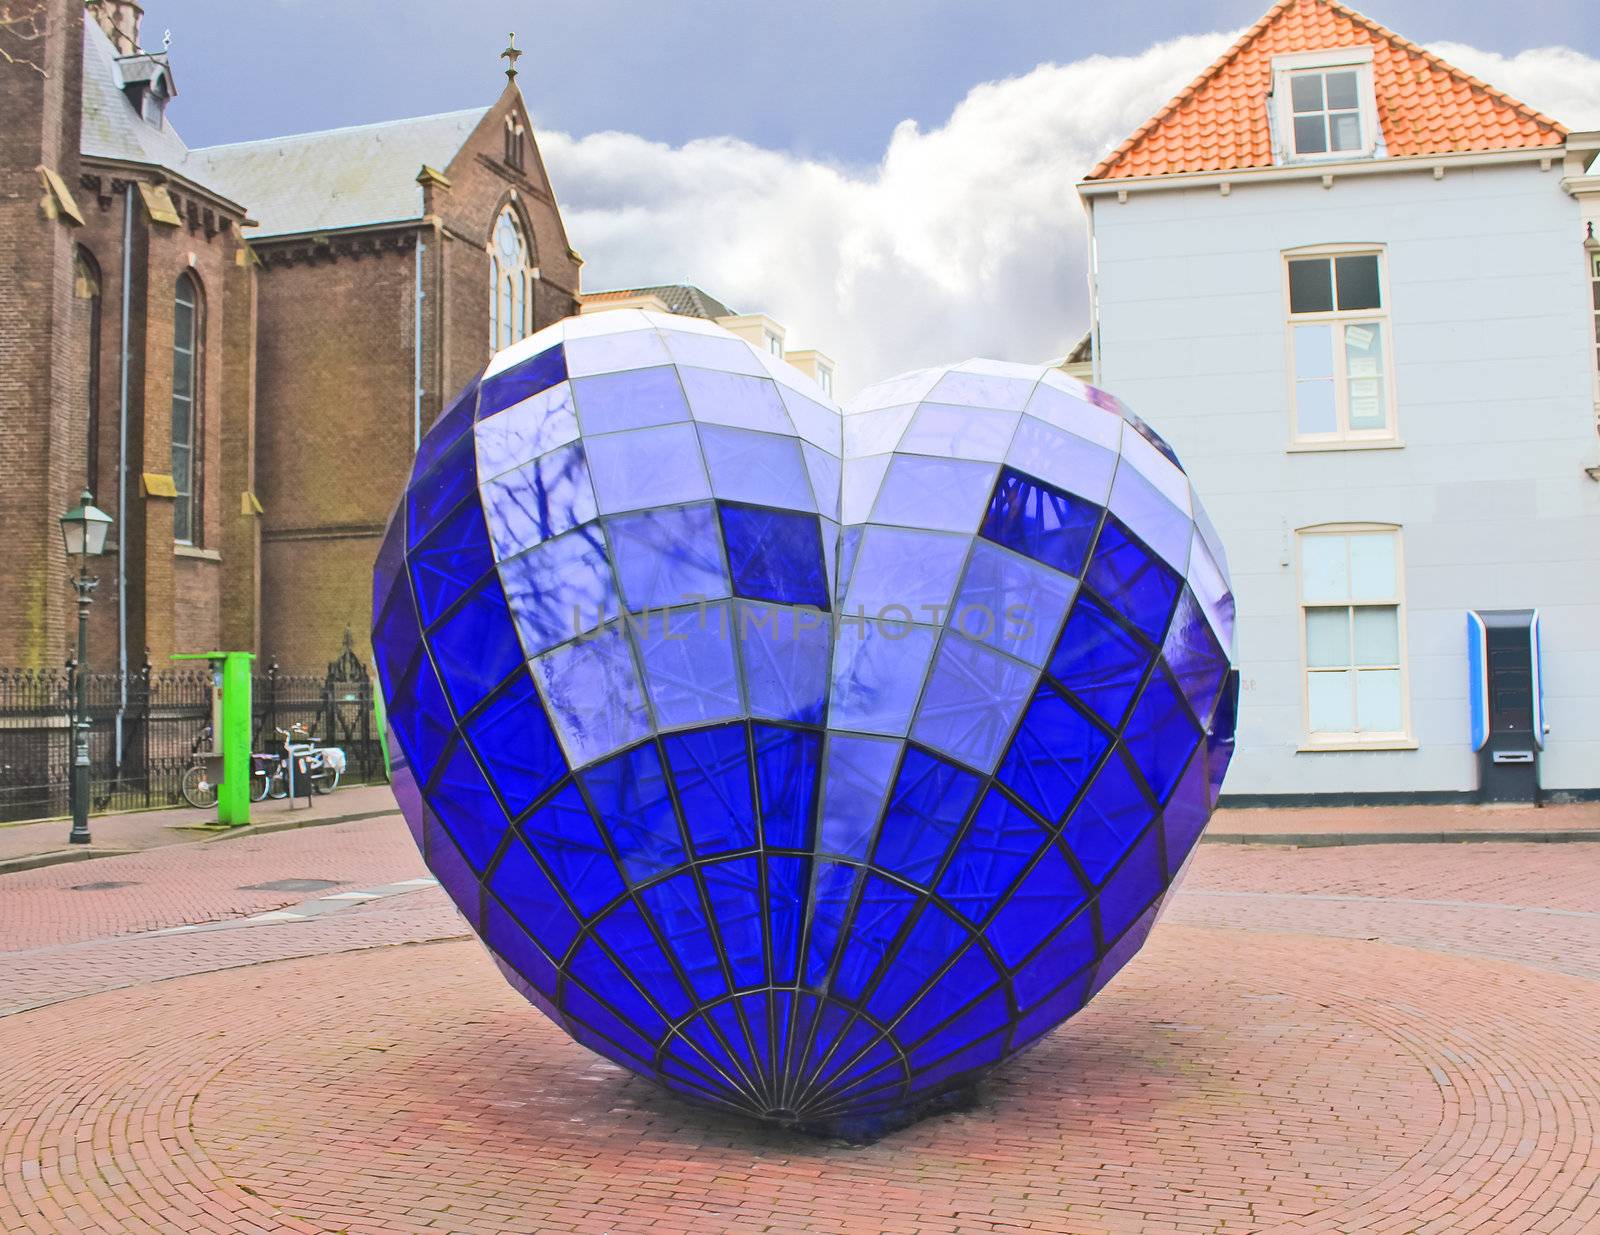 Abstract sculpture in the town square. Delft,  Netherlands